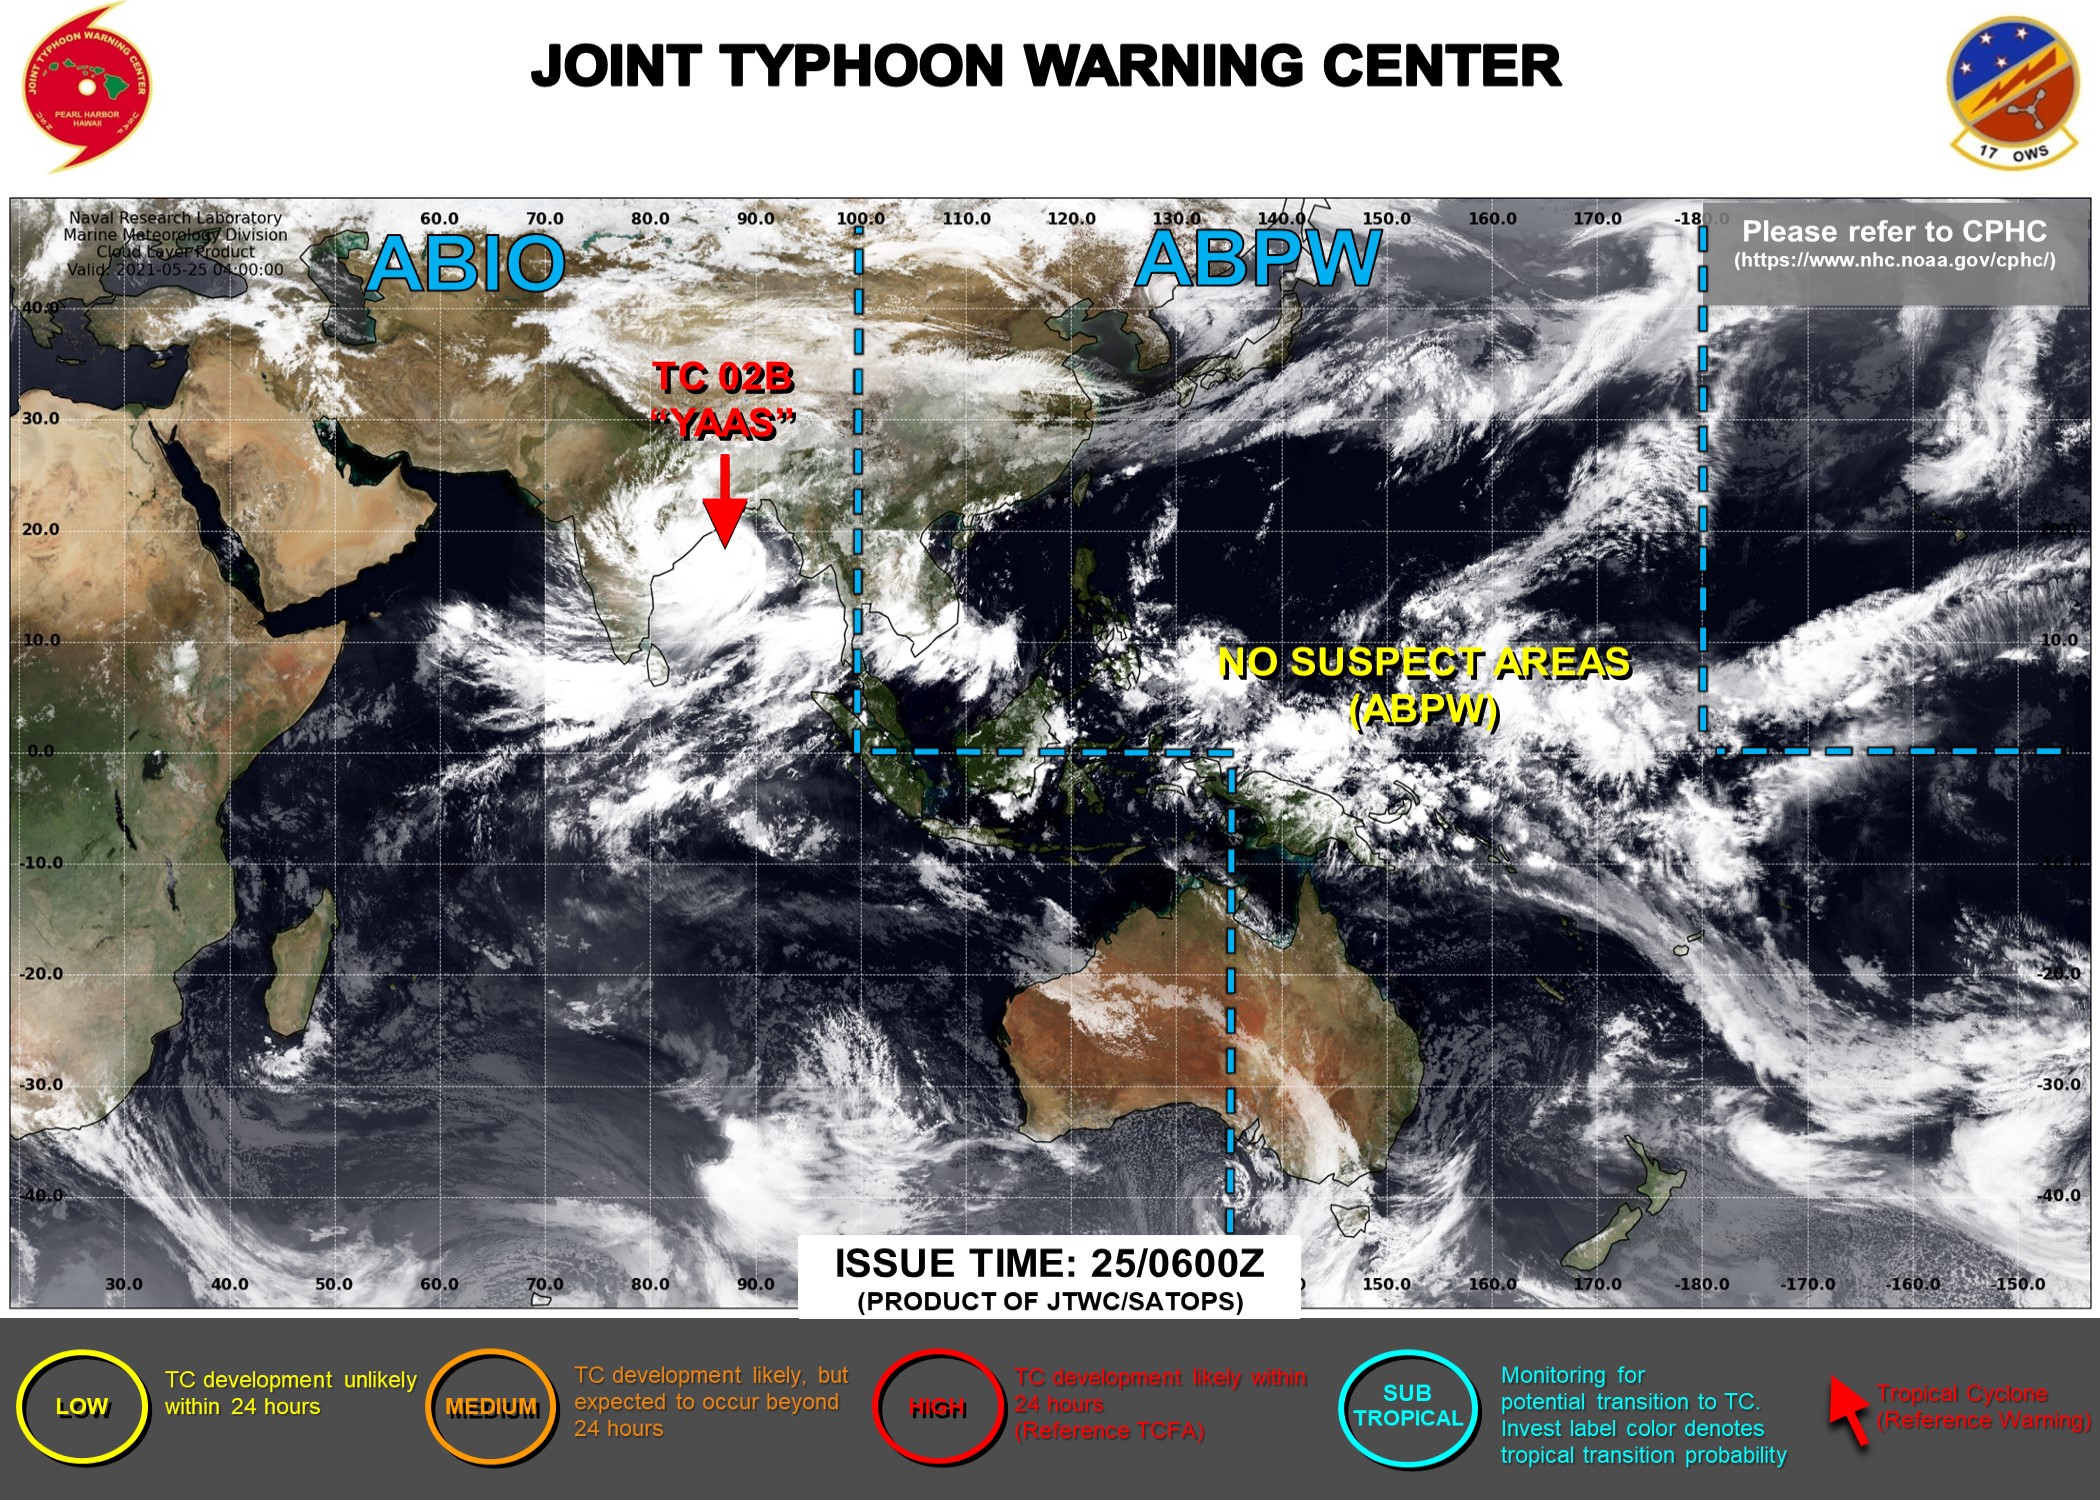 JTWC HAS BEEN ISSUING 6HOURLY WARNINGS AND 3HOURLY SATELLITE BULLETINS ON TC 02B(YAAS).